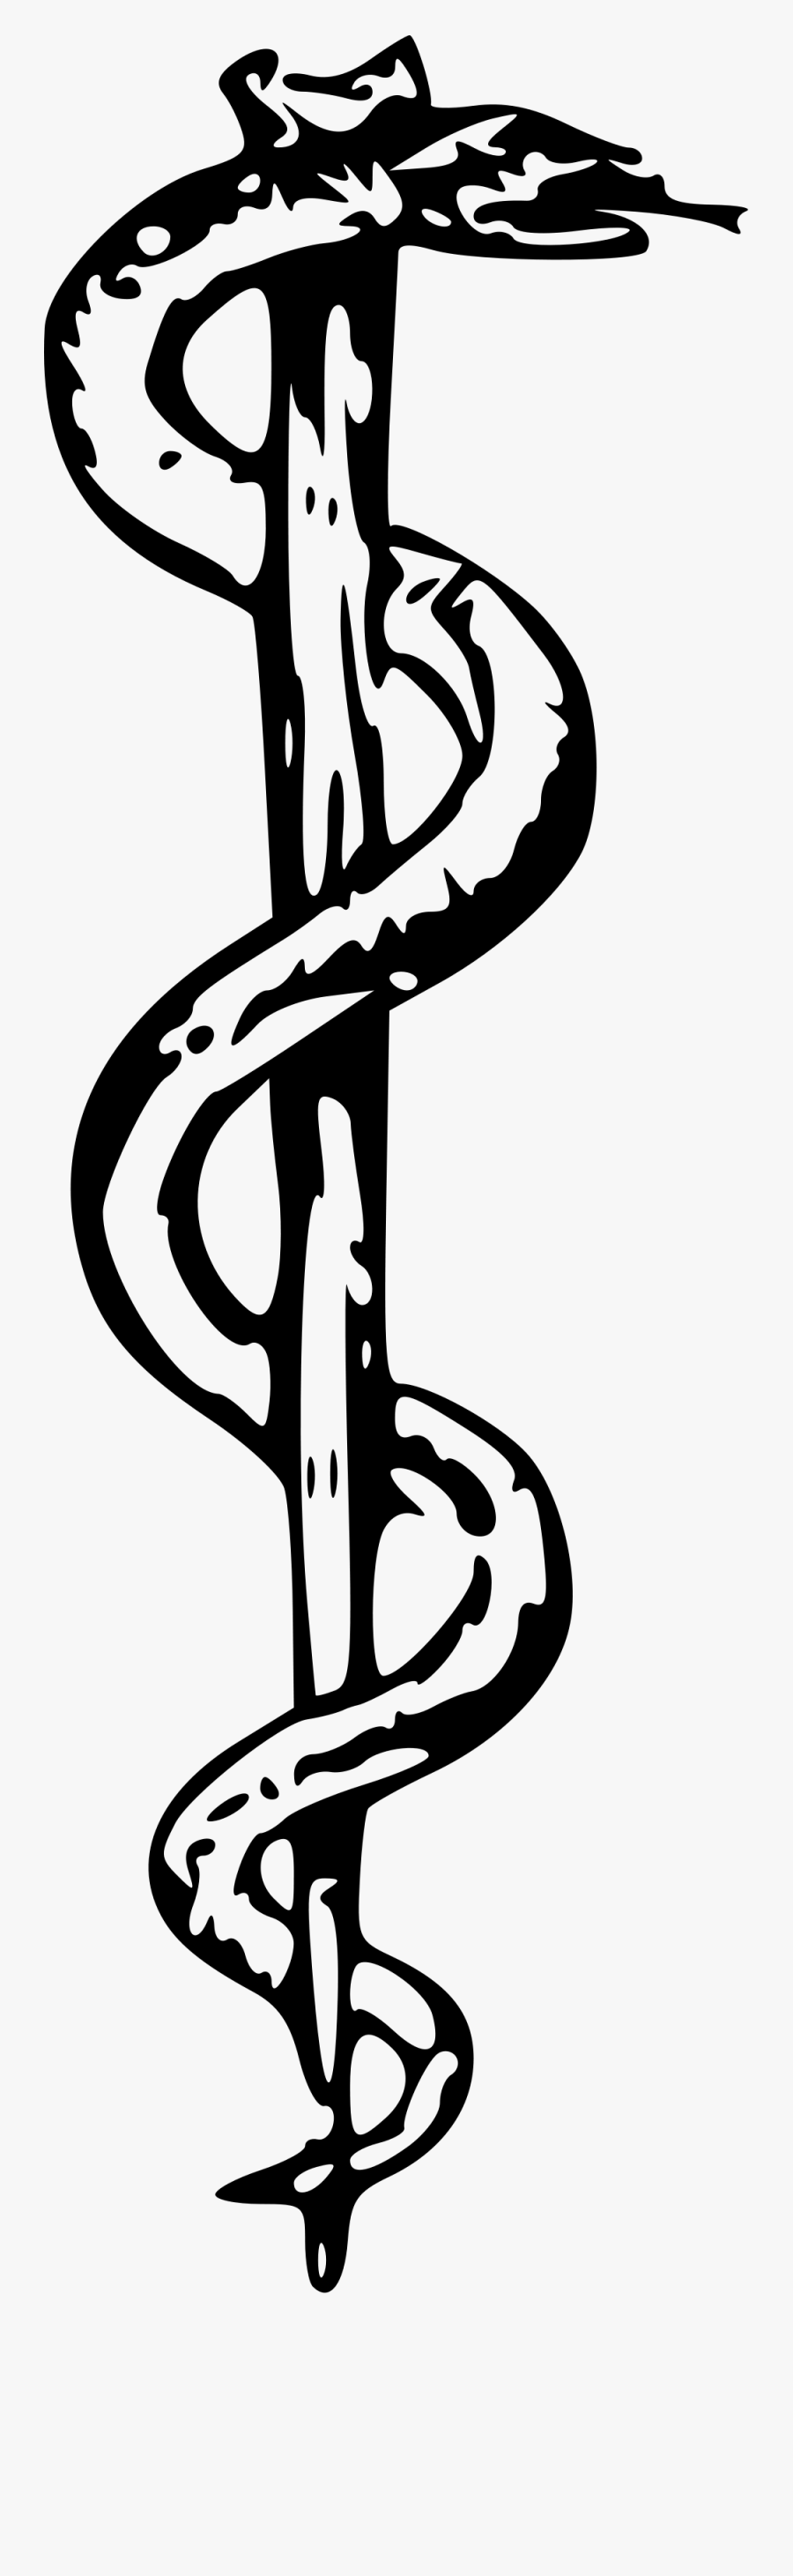 Rod Of Asclepius, Caduceus - Rod Of Asclepius Png, Transparent Clipart